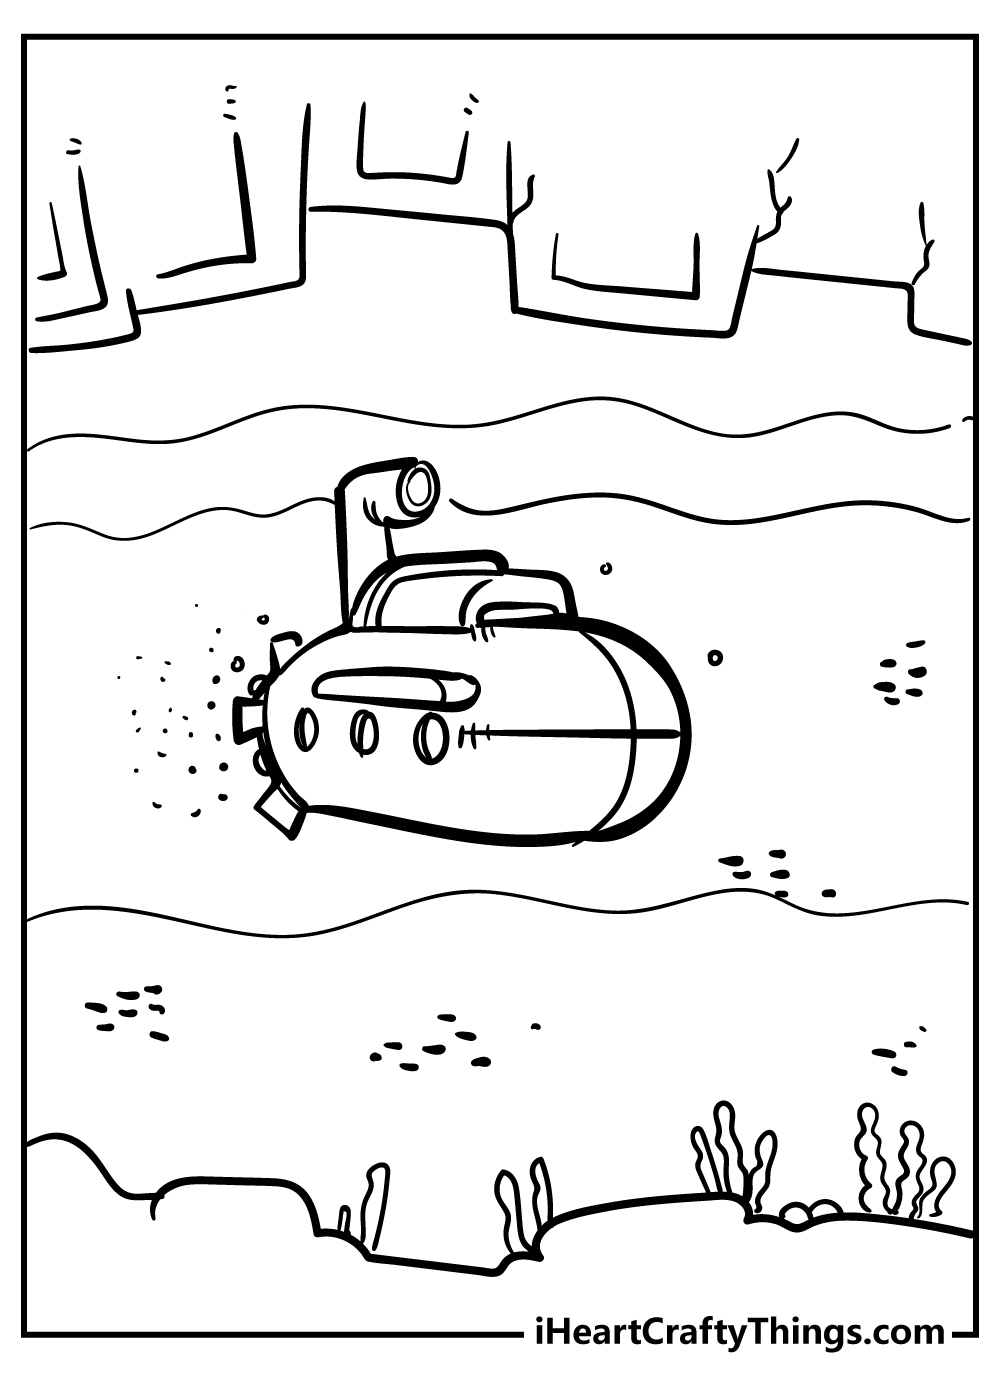 Submarine Coloring Pages for kids free download